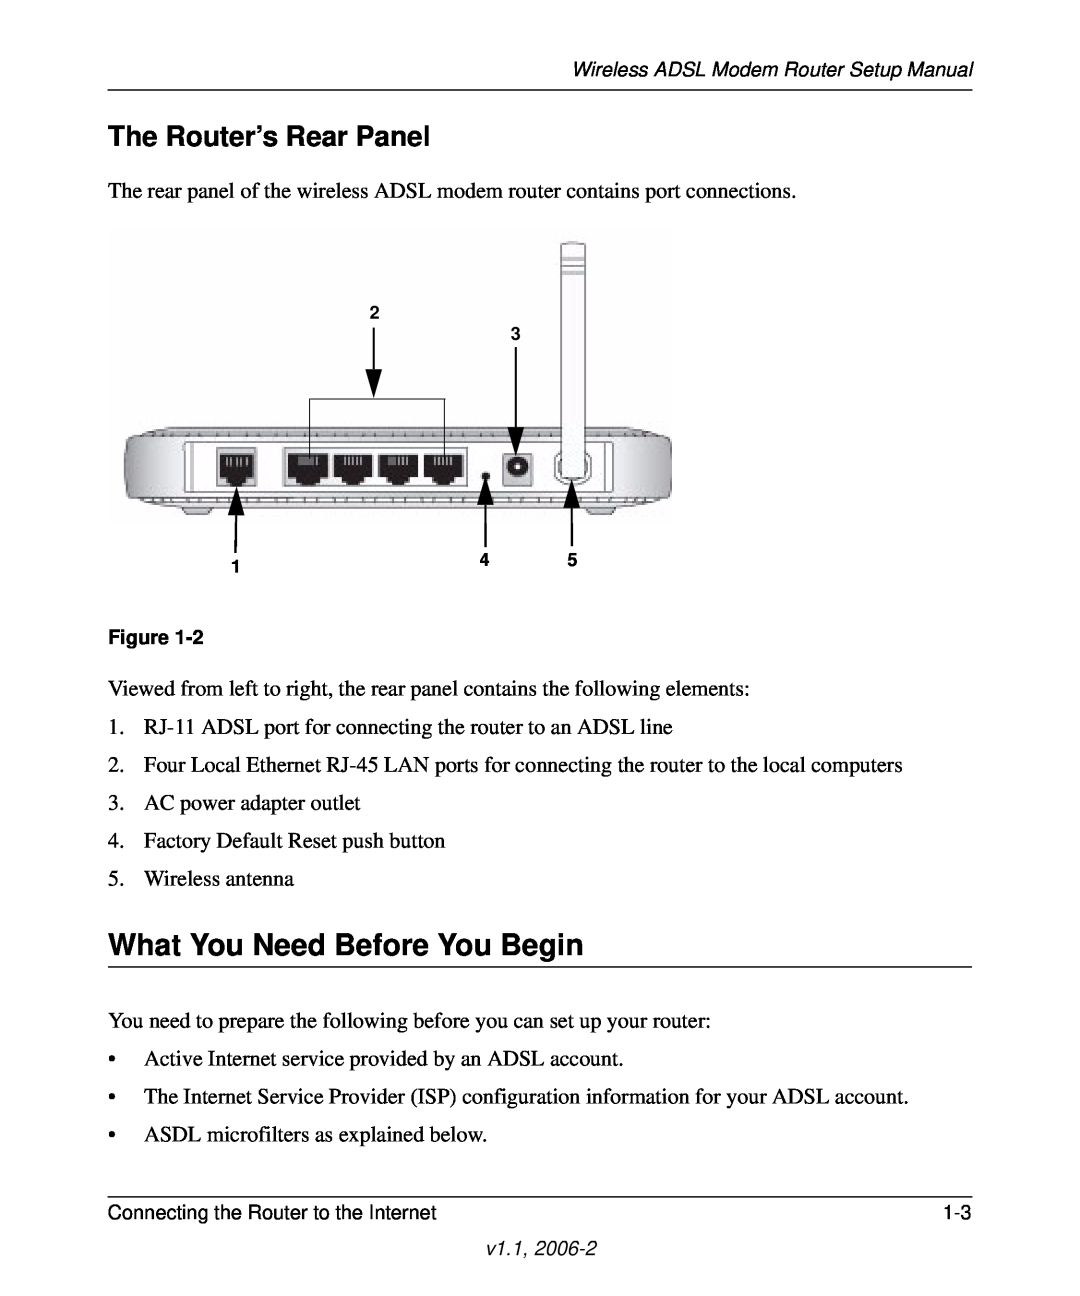 NETGEAR Wireless ADSL Modem Router manual What You Need Before You Begin, The Router’s Rear Panel 